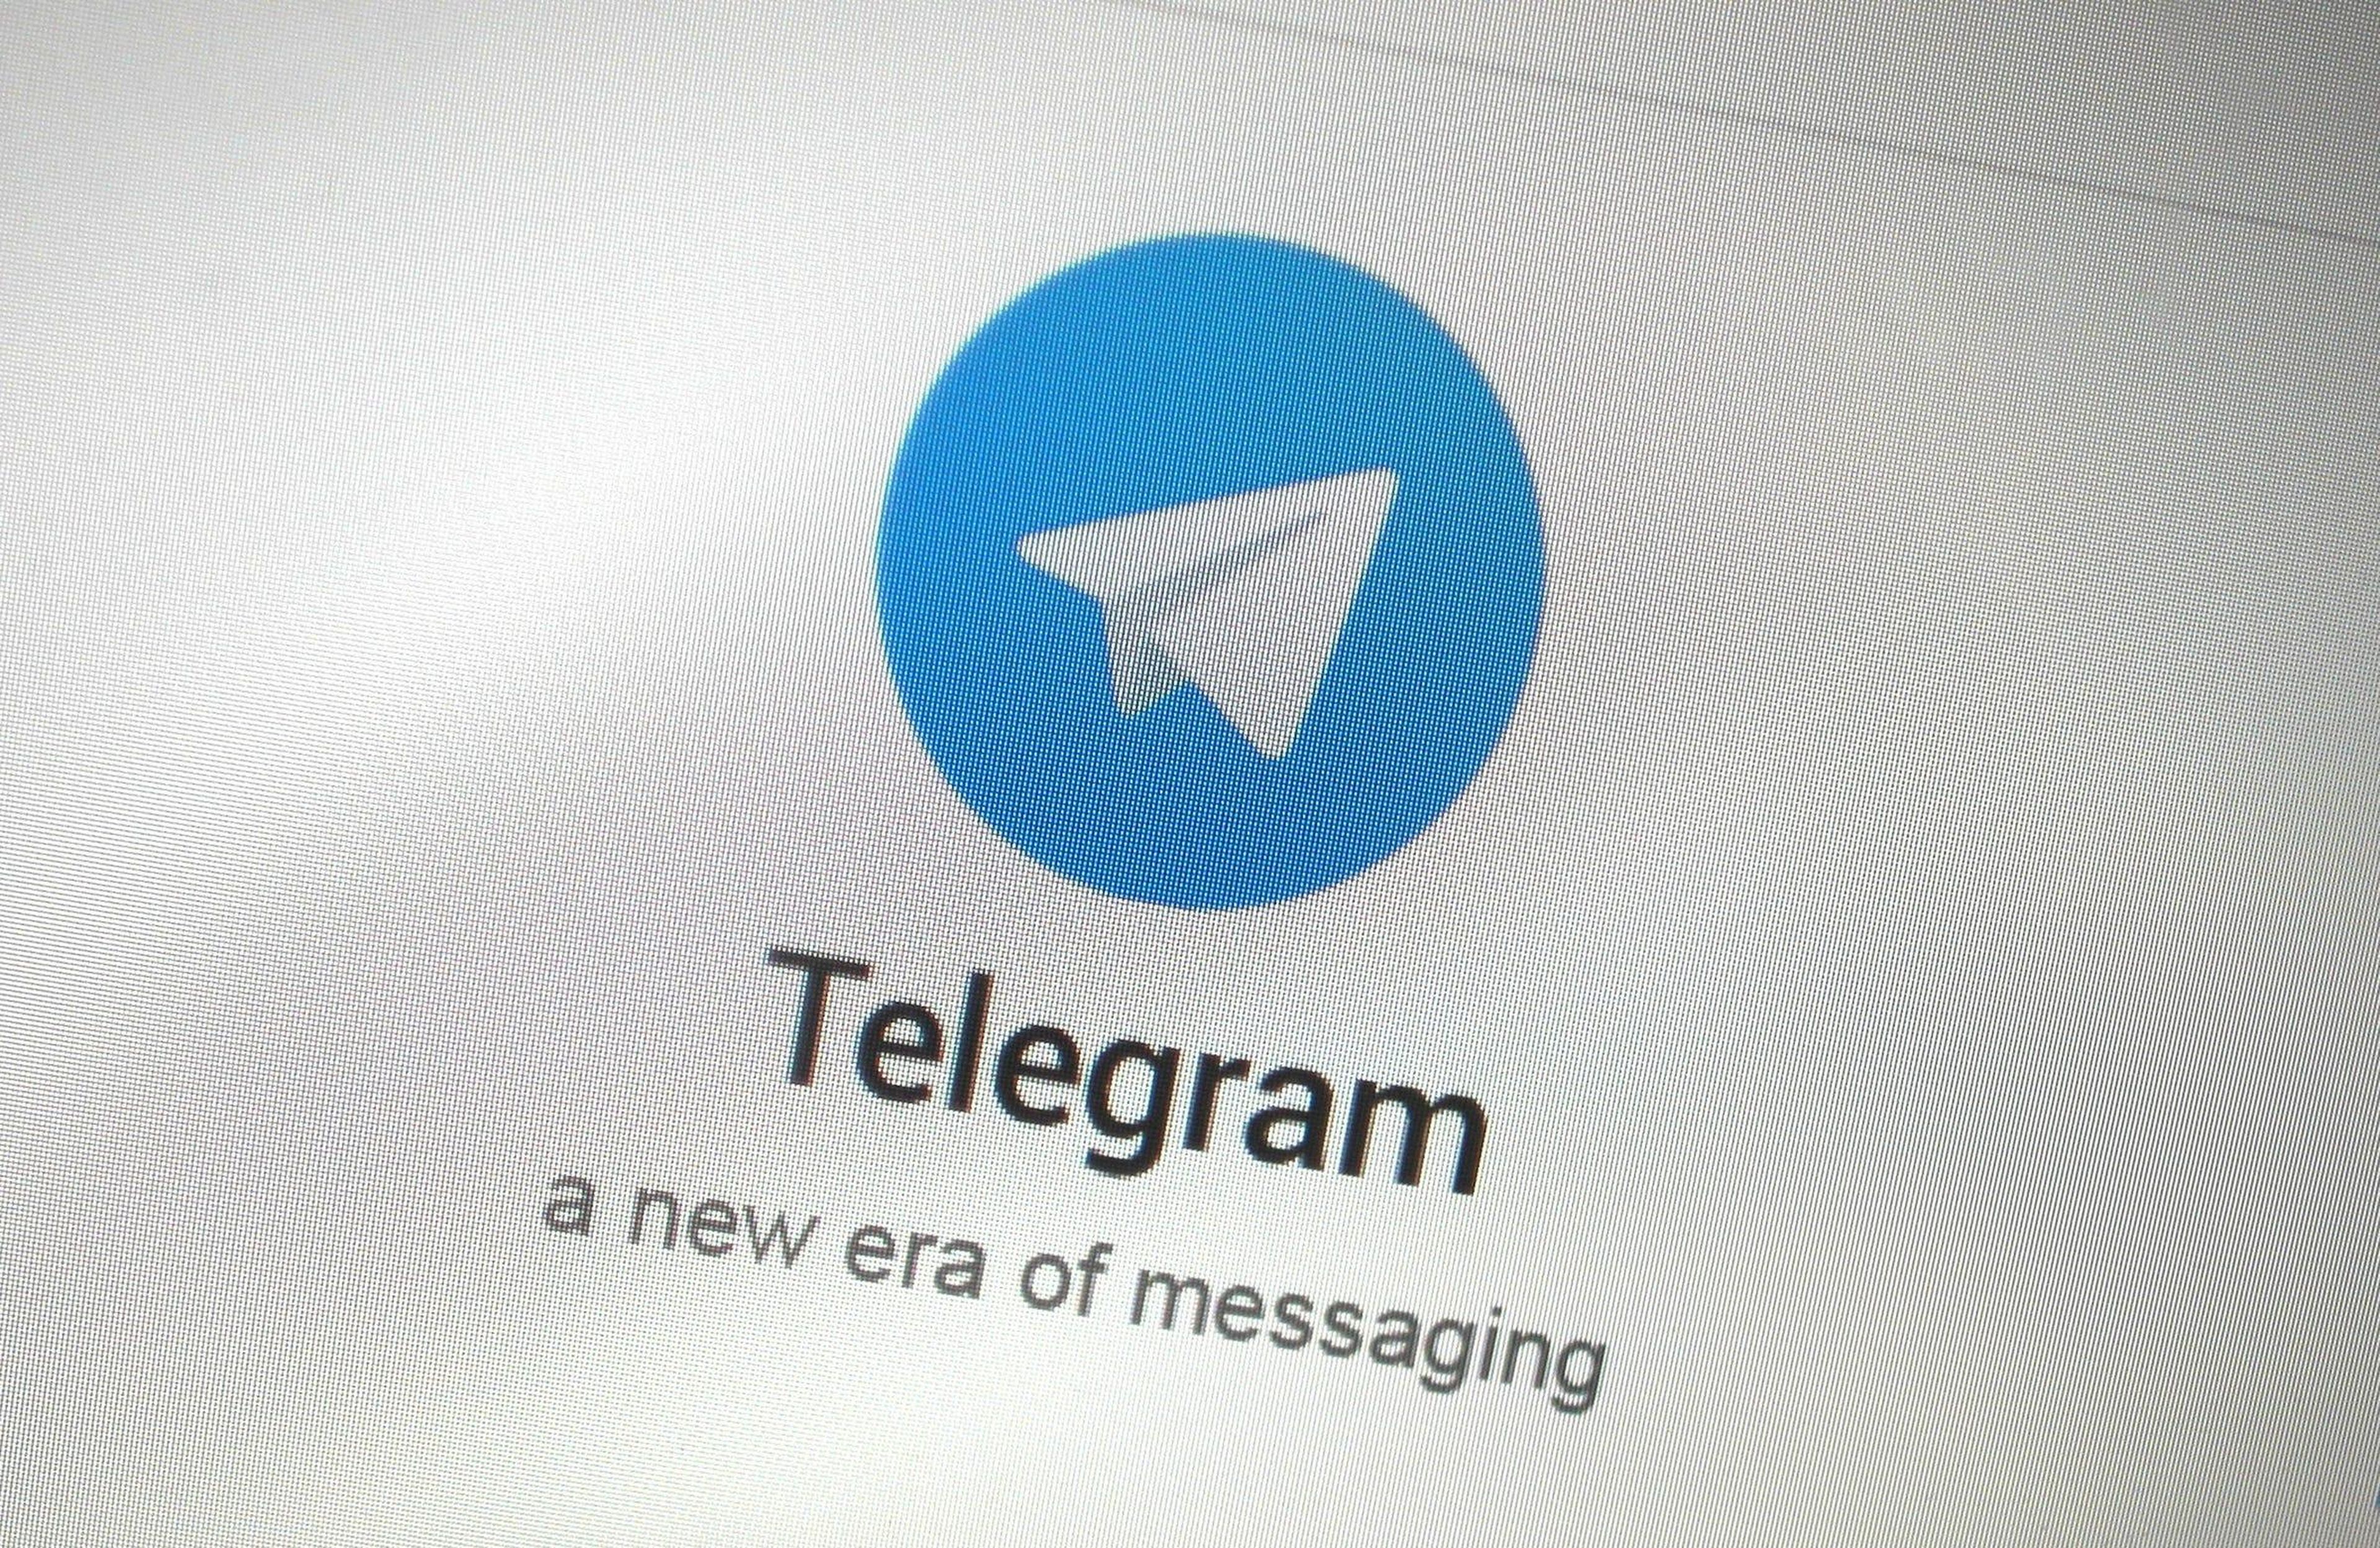 FILE PHOTO: The Telegram messaging app logo is seen on a website in Singapore. Thomas White/Reuters